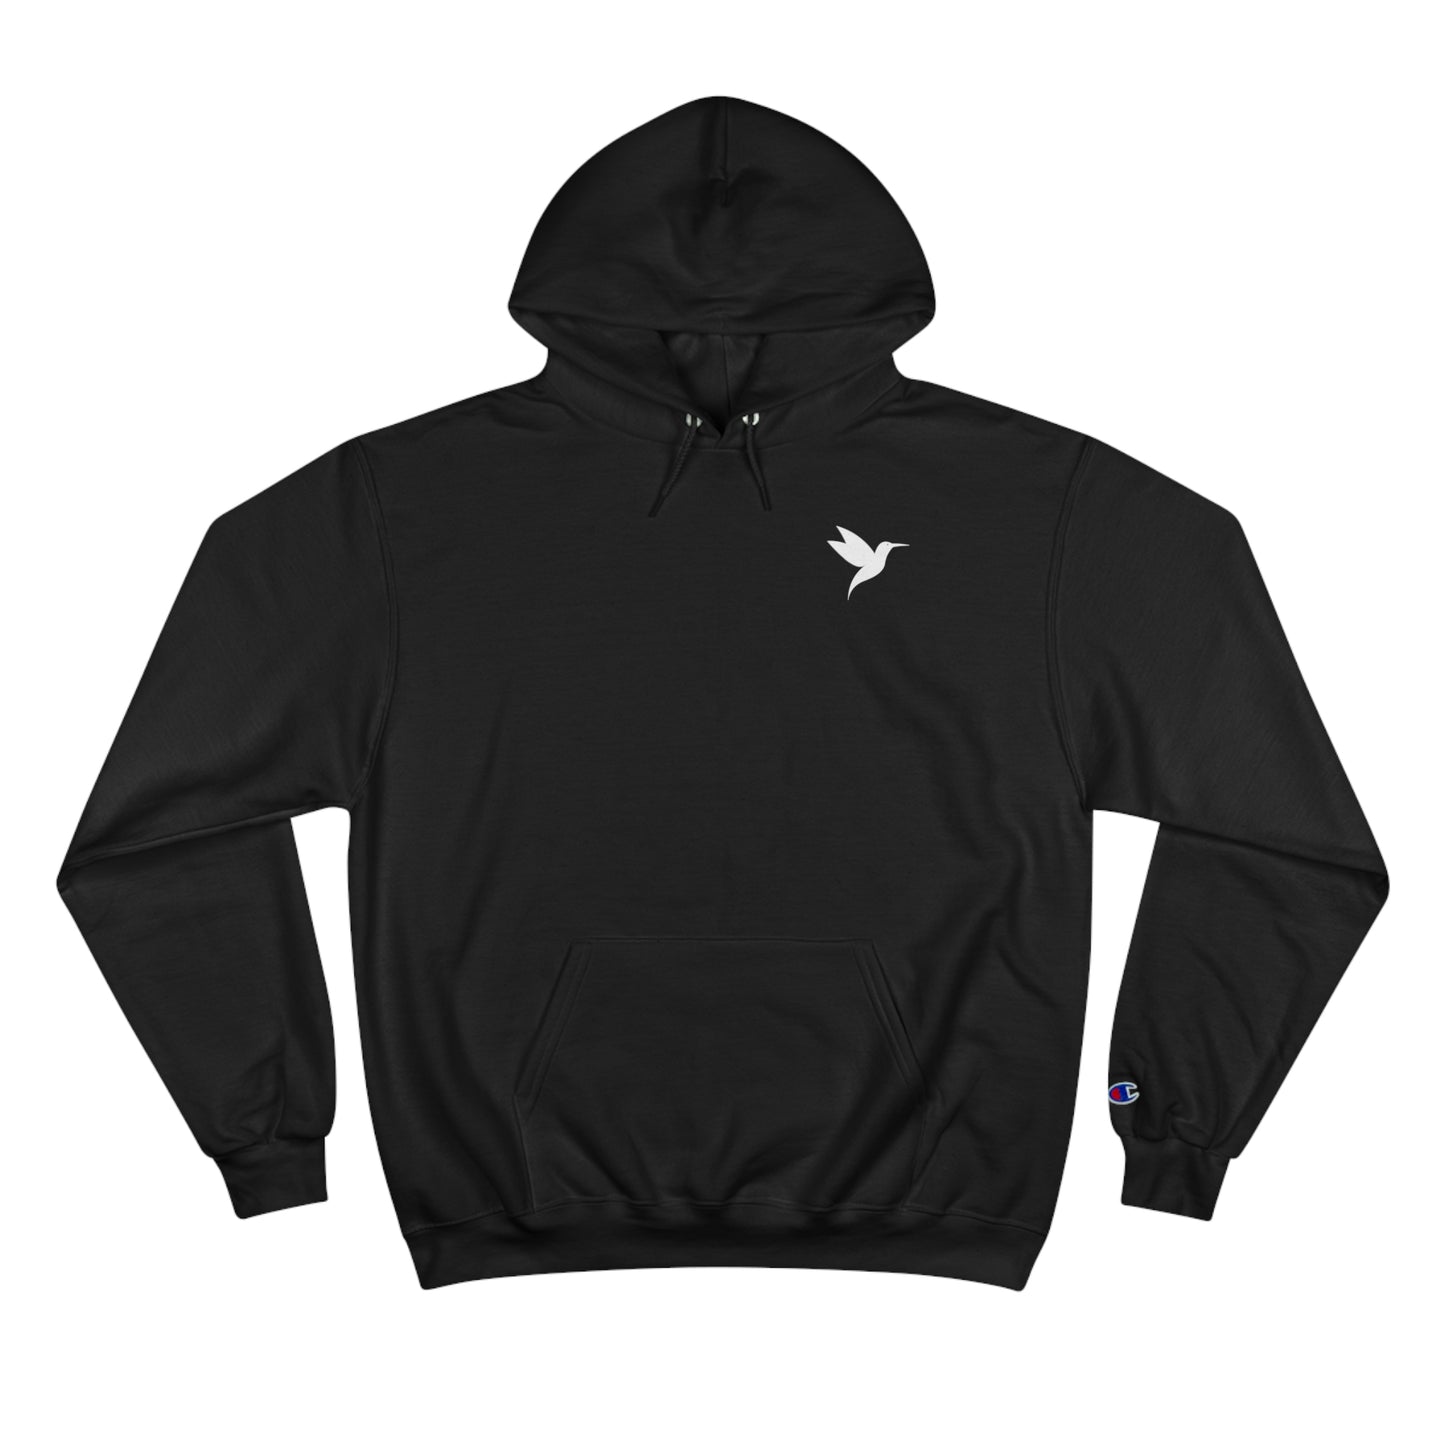 All The Gods Champion Hoodie